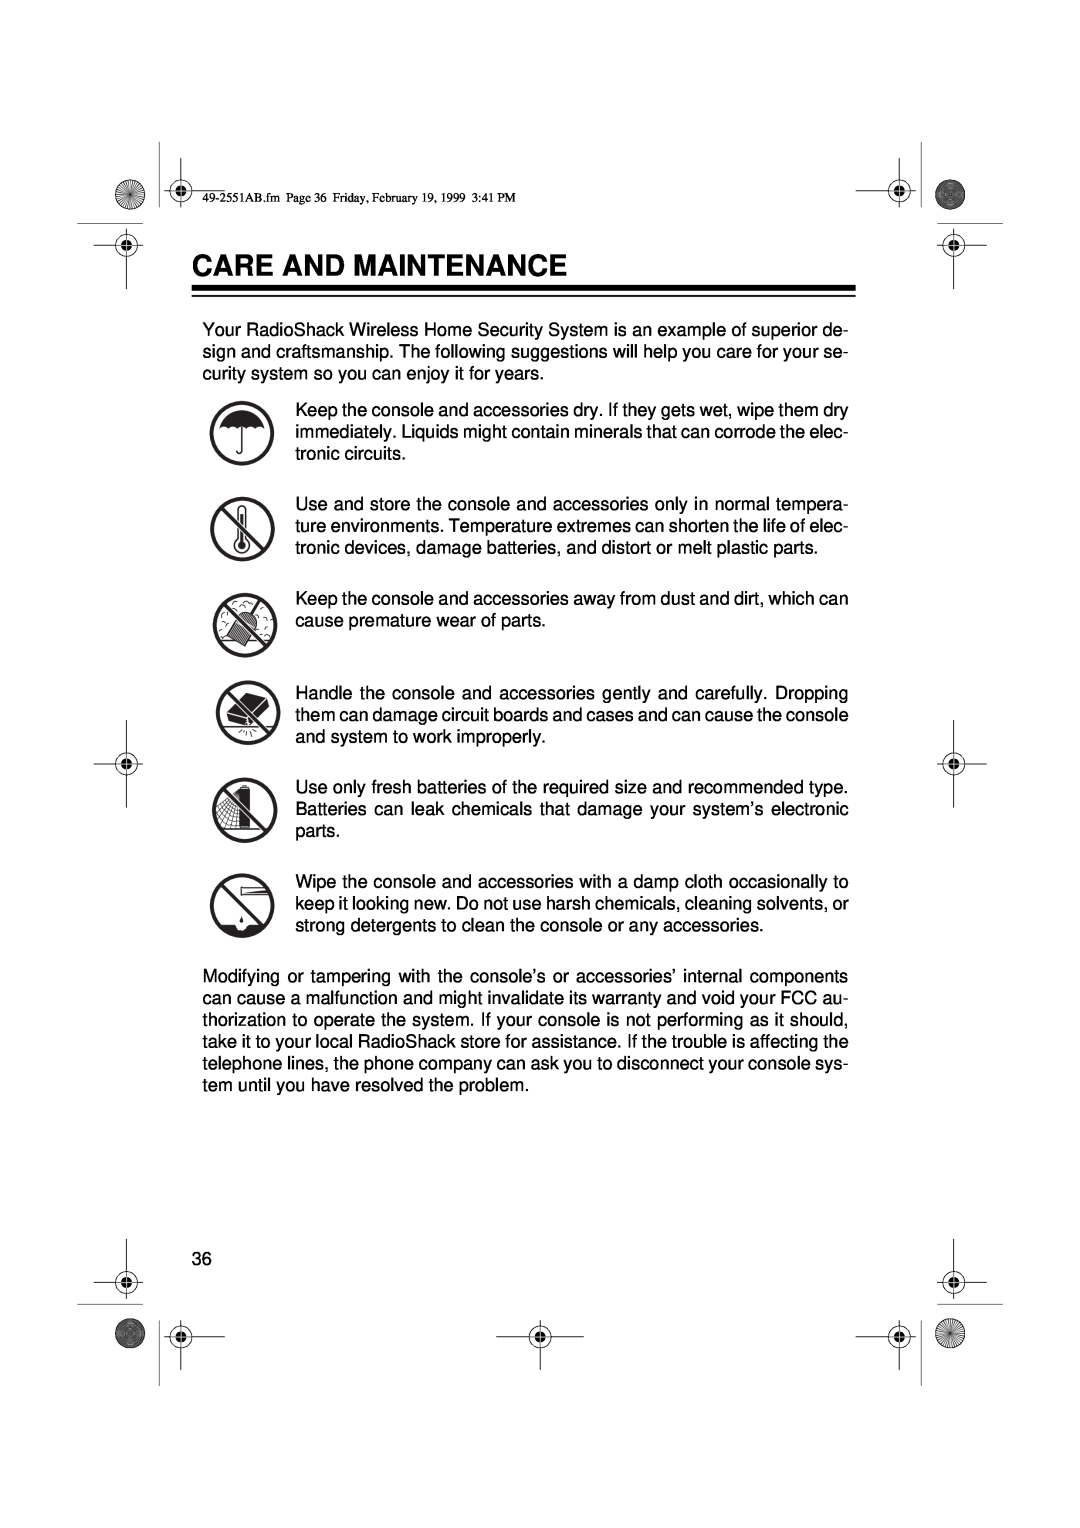 Radio Shack 49-2551A owner manual Care And Maintenance 